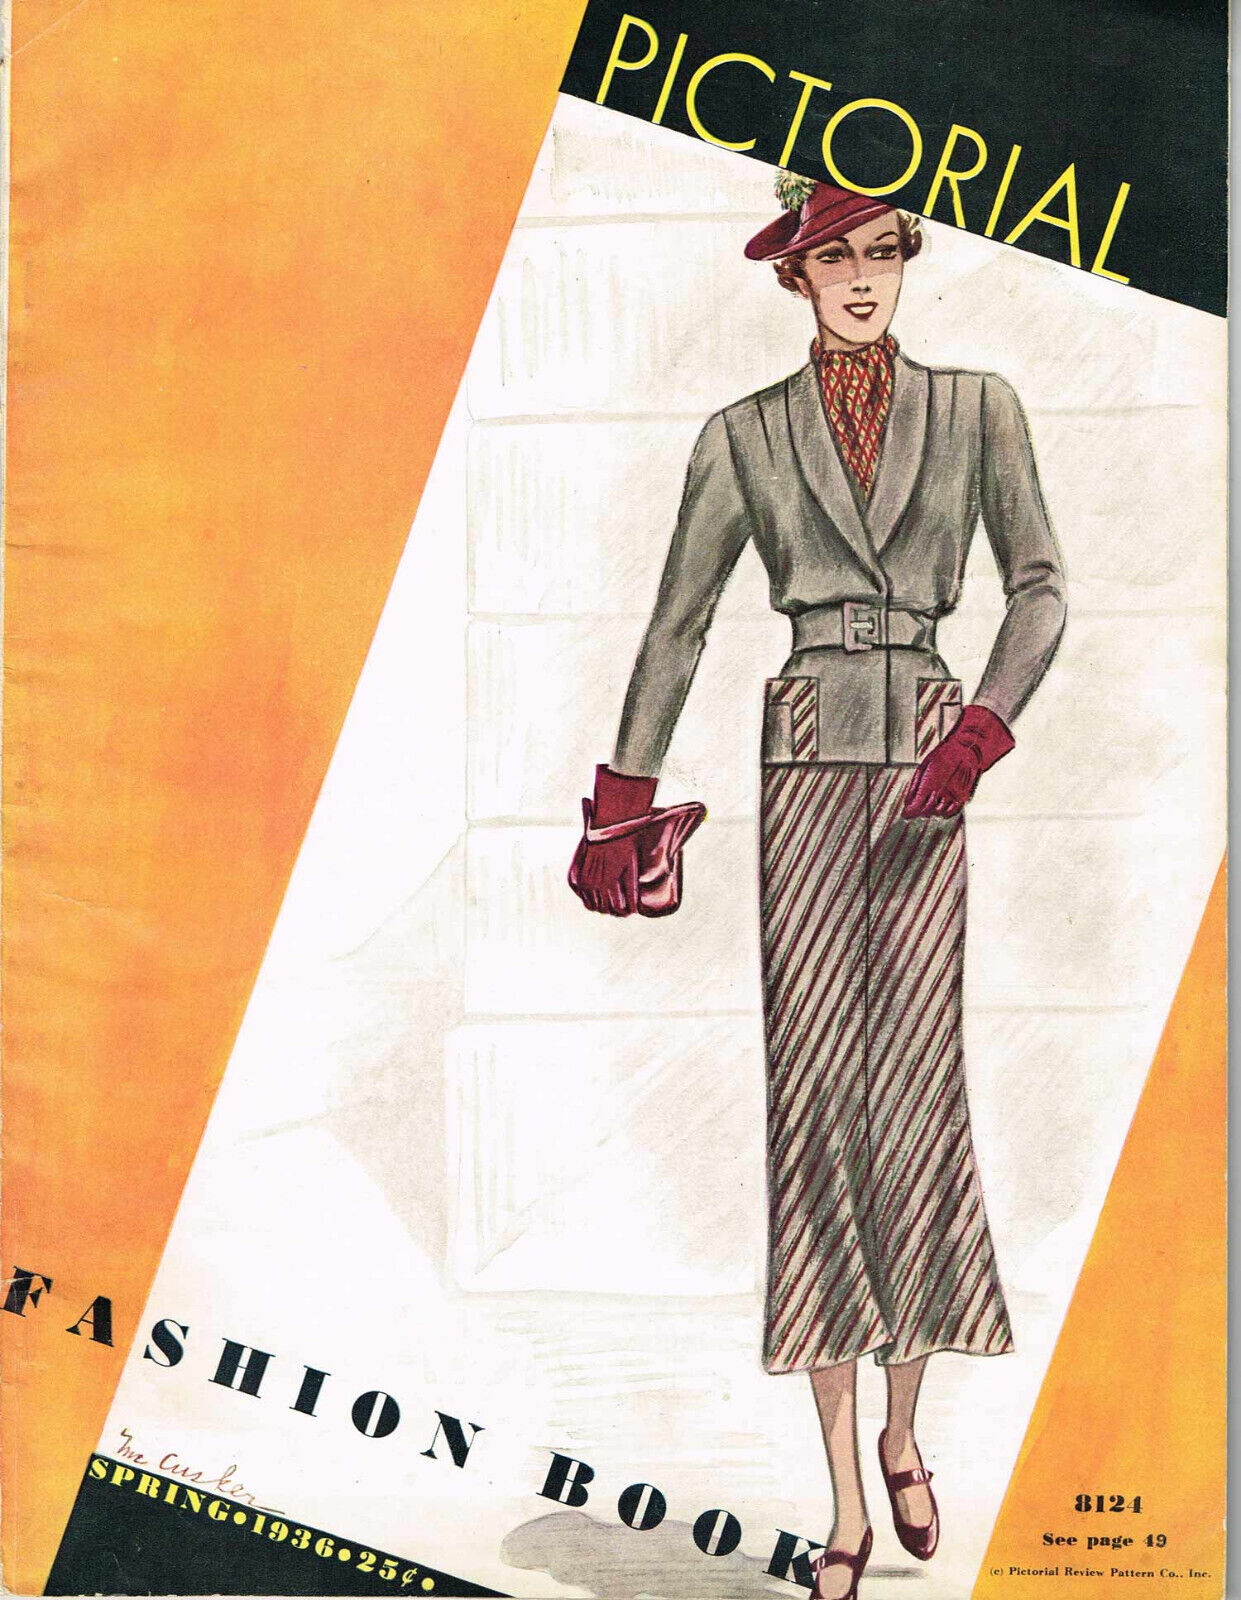 Rare 1930s Pictorial Review Spring 1936 Sewing Pattern Catalog 52pg Ebook on CD